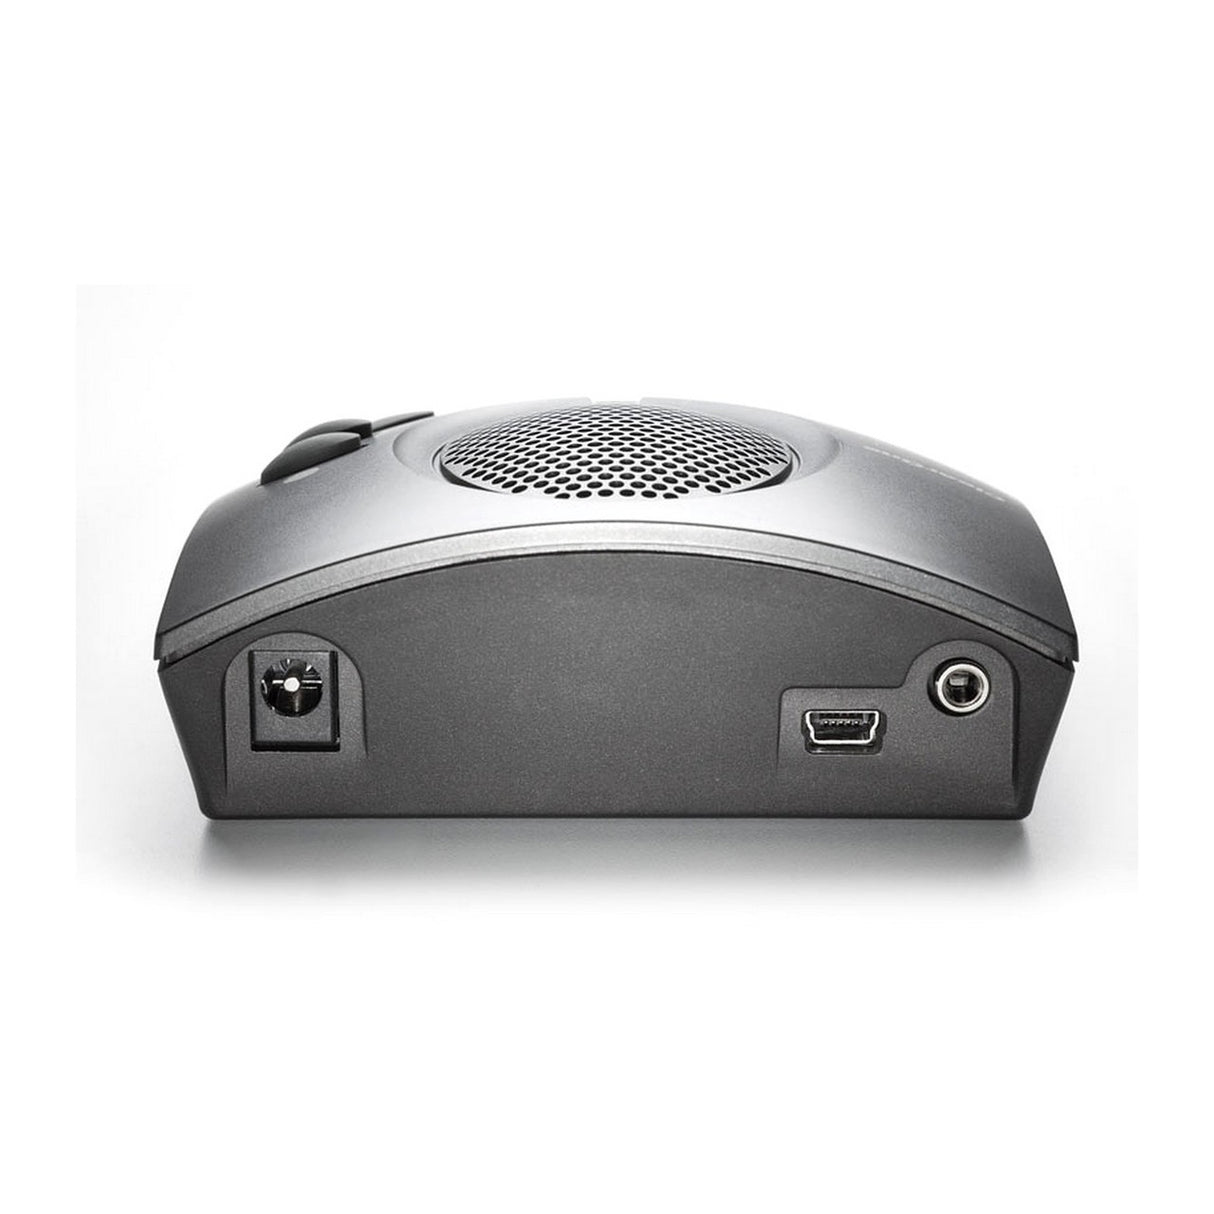 ClearOne CHAT 50 USB Plus International | Personal USB 2.0 Noise Cancellation PC Conferencing Speakerphone with International Power Clips 910-159-002-01